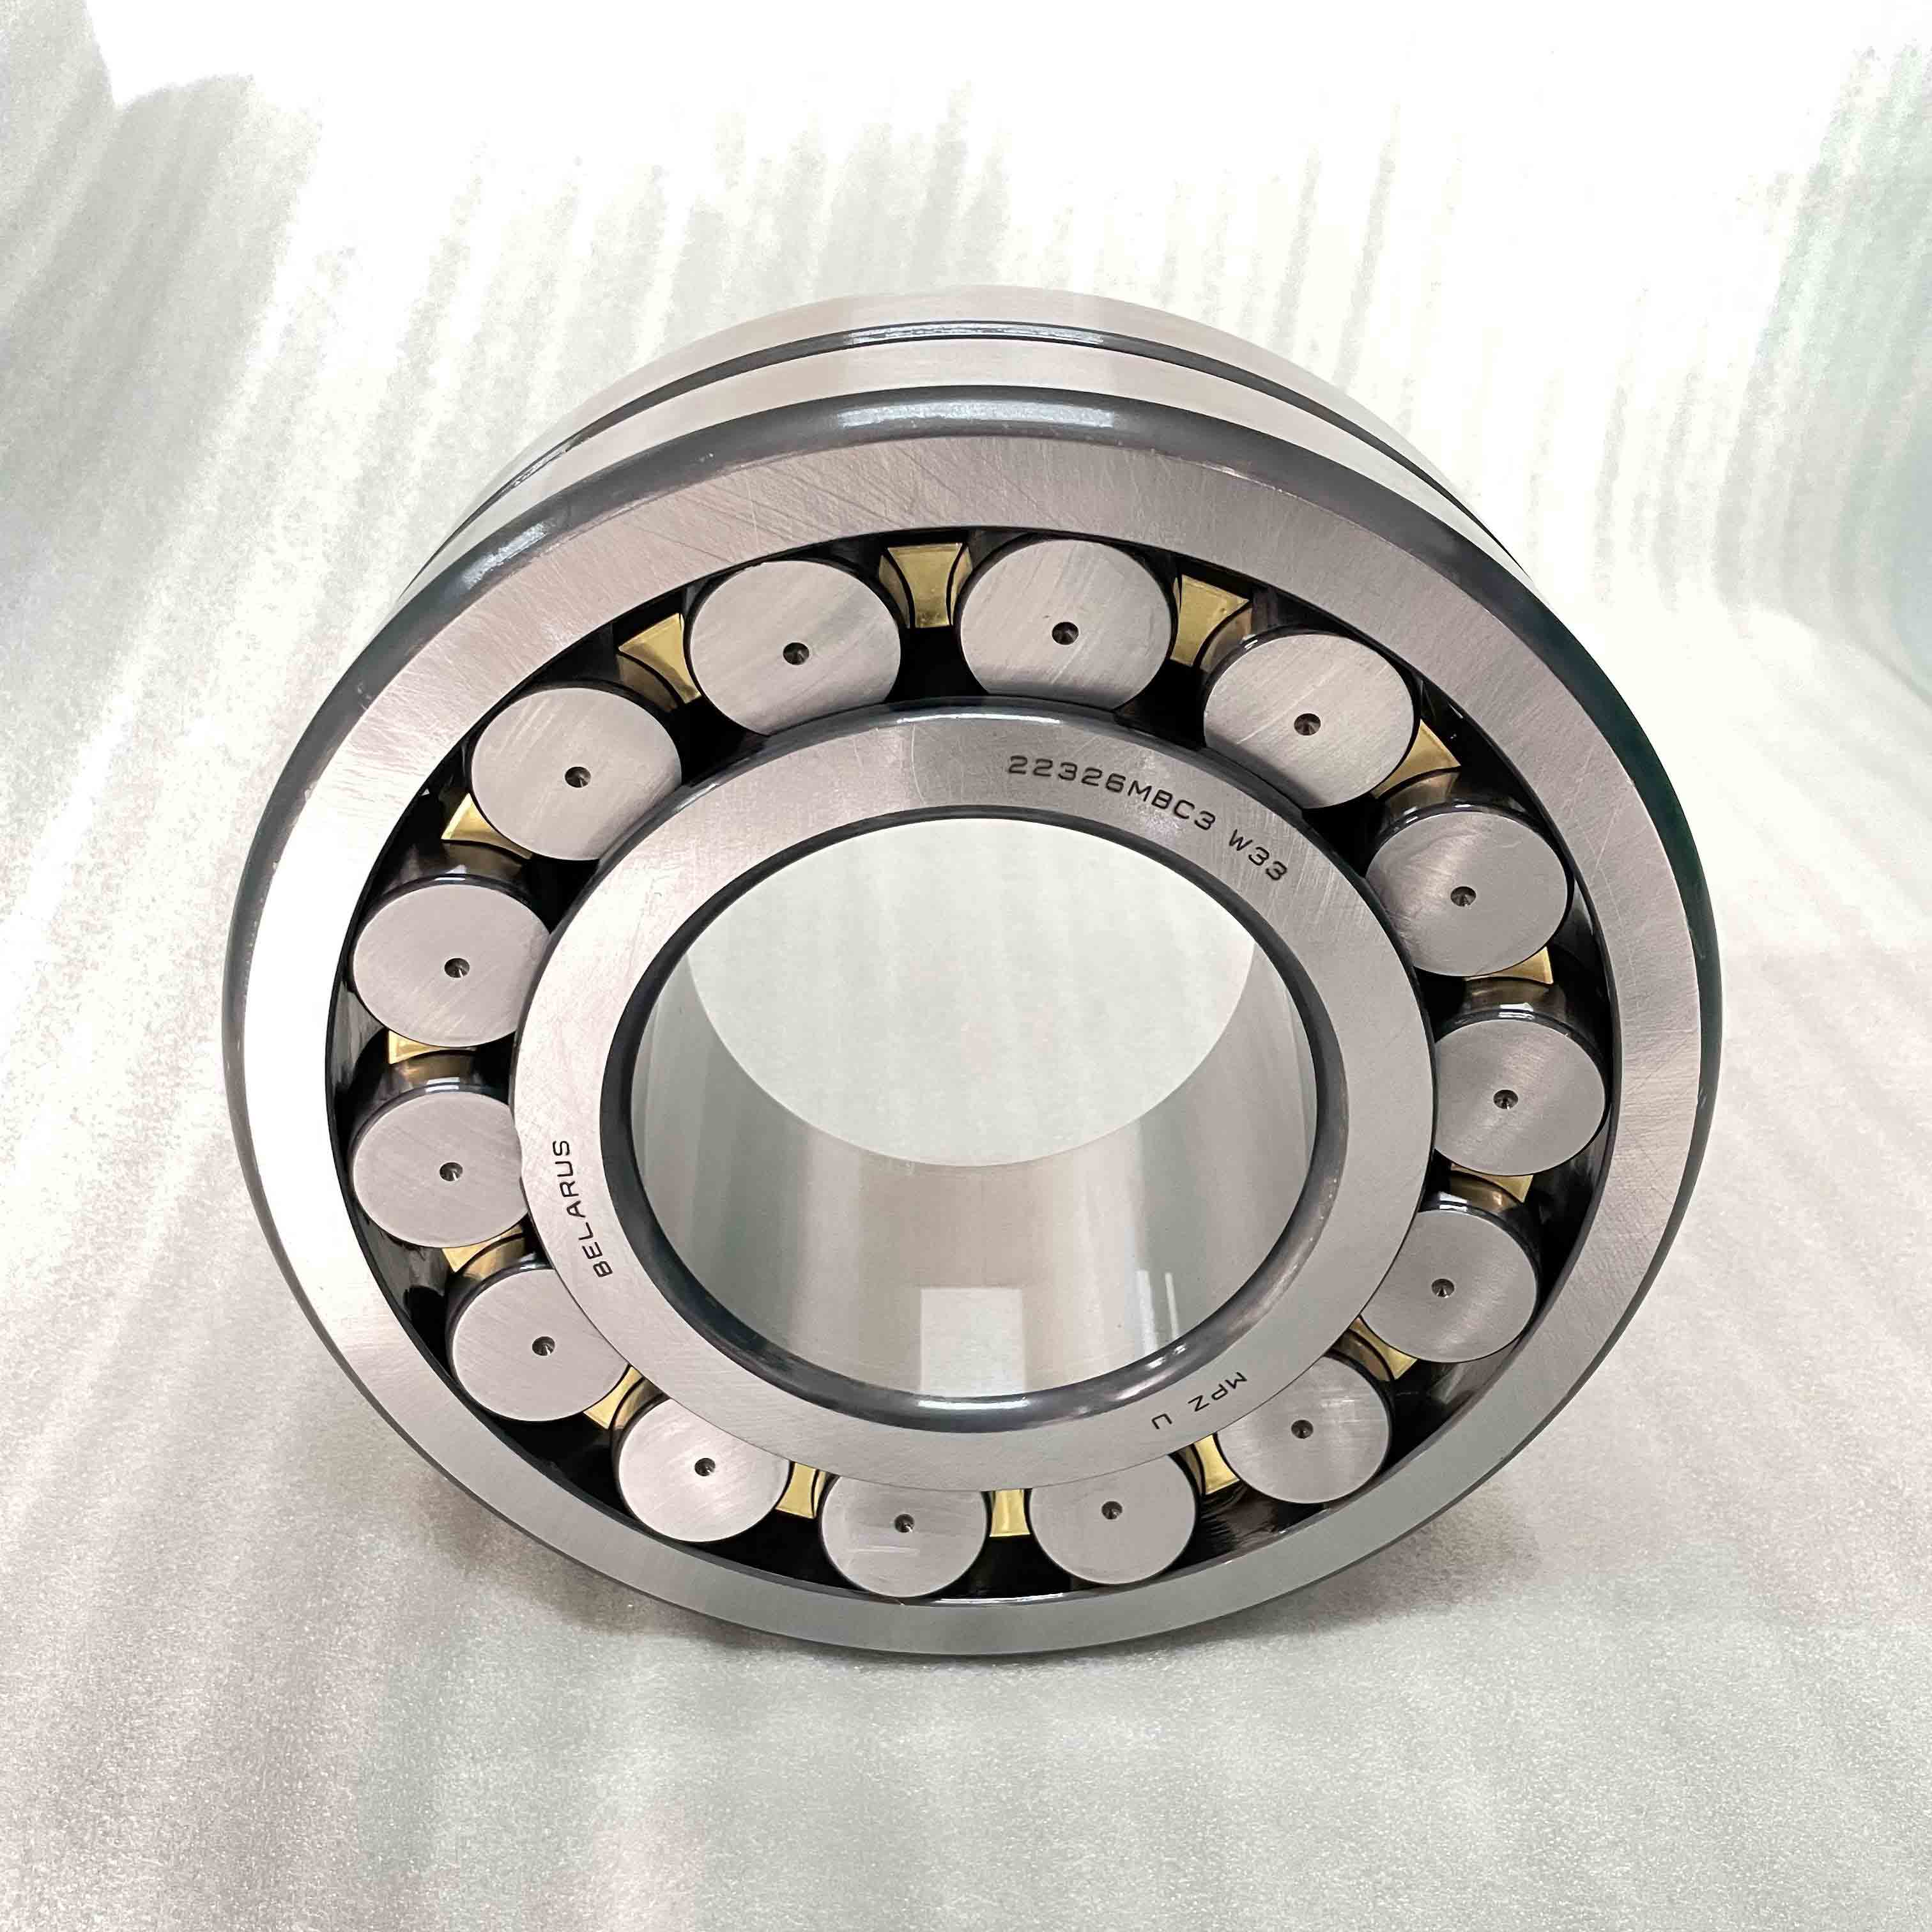 High-Quality Ceramic Needle Roller Bearings Available Now!